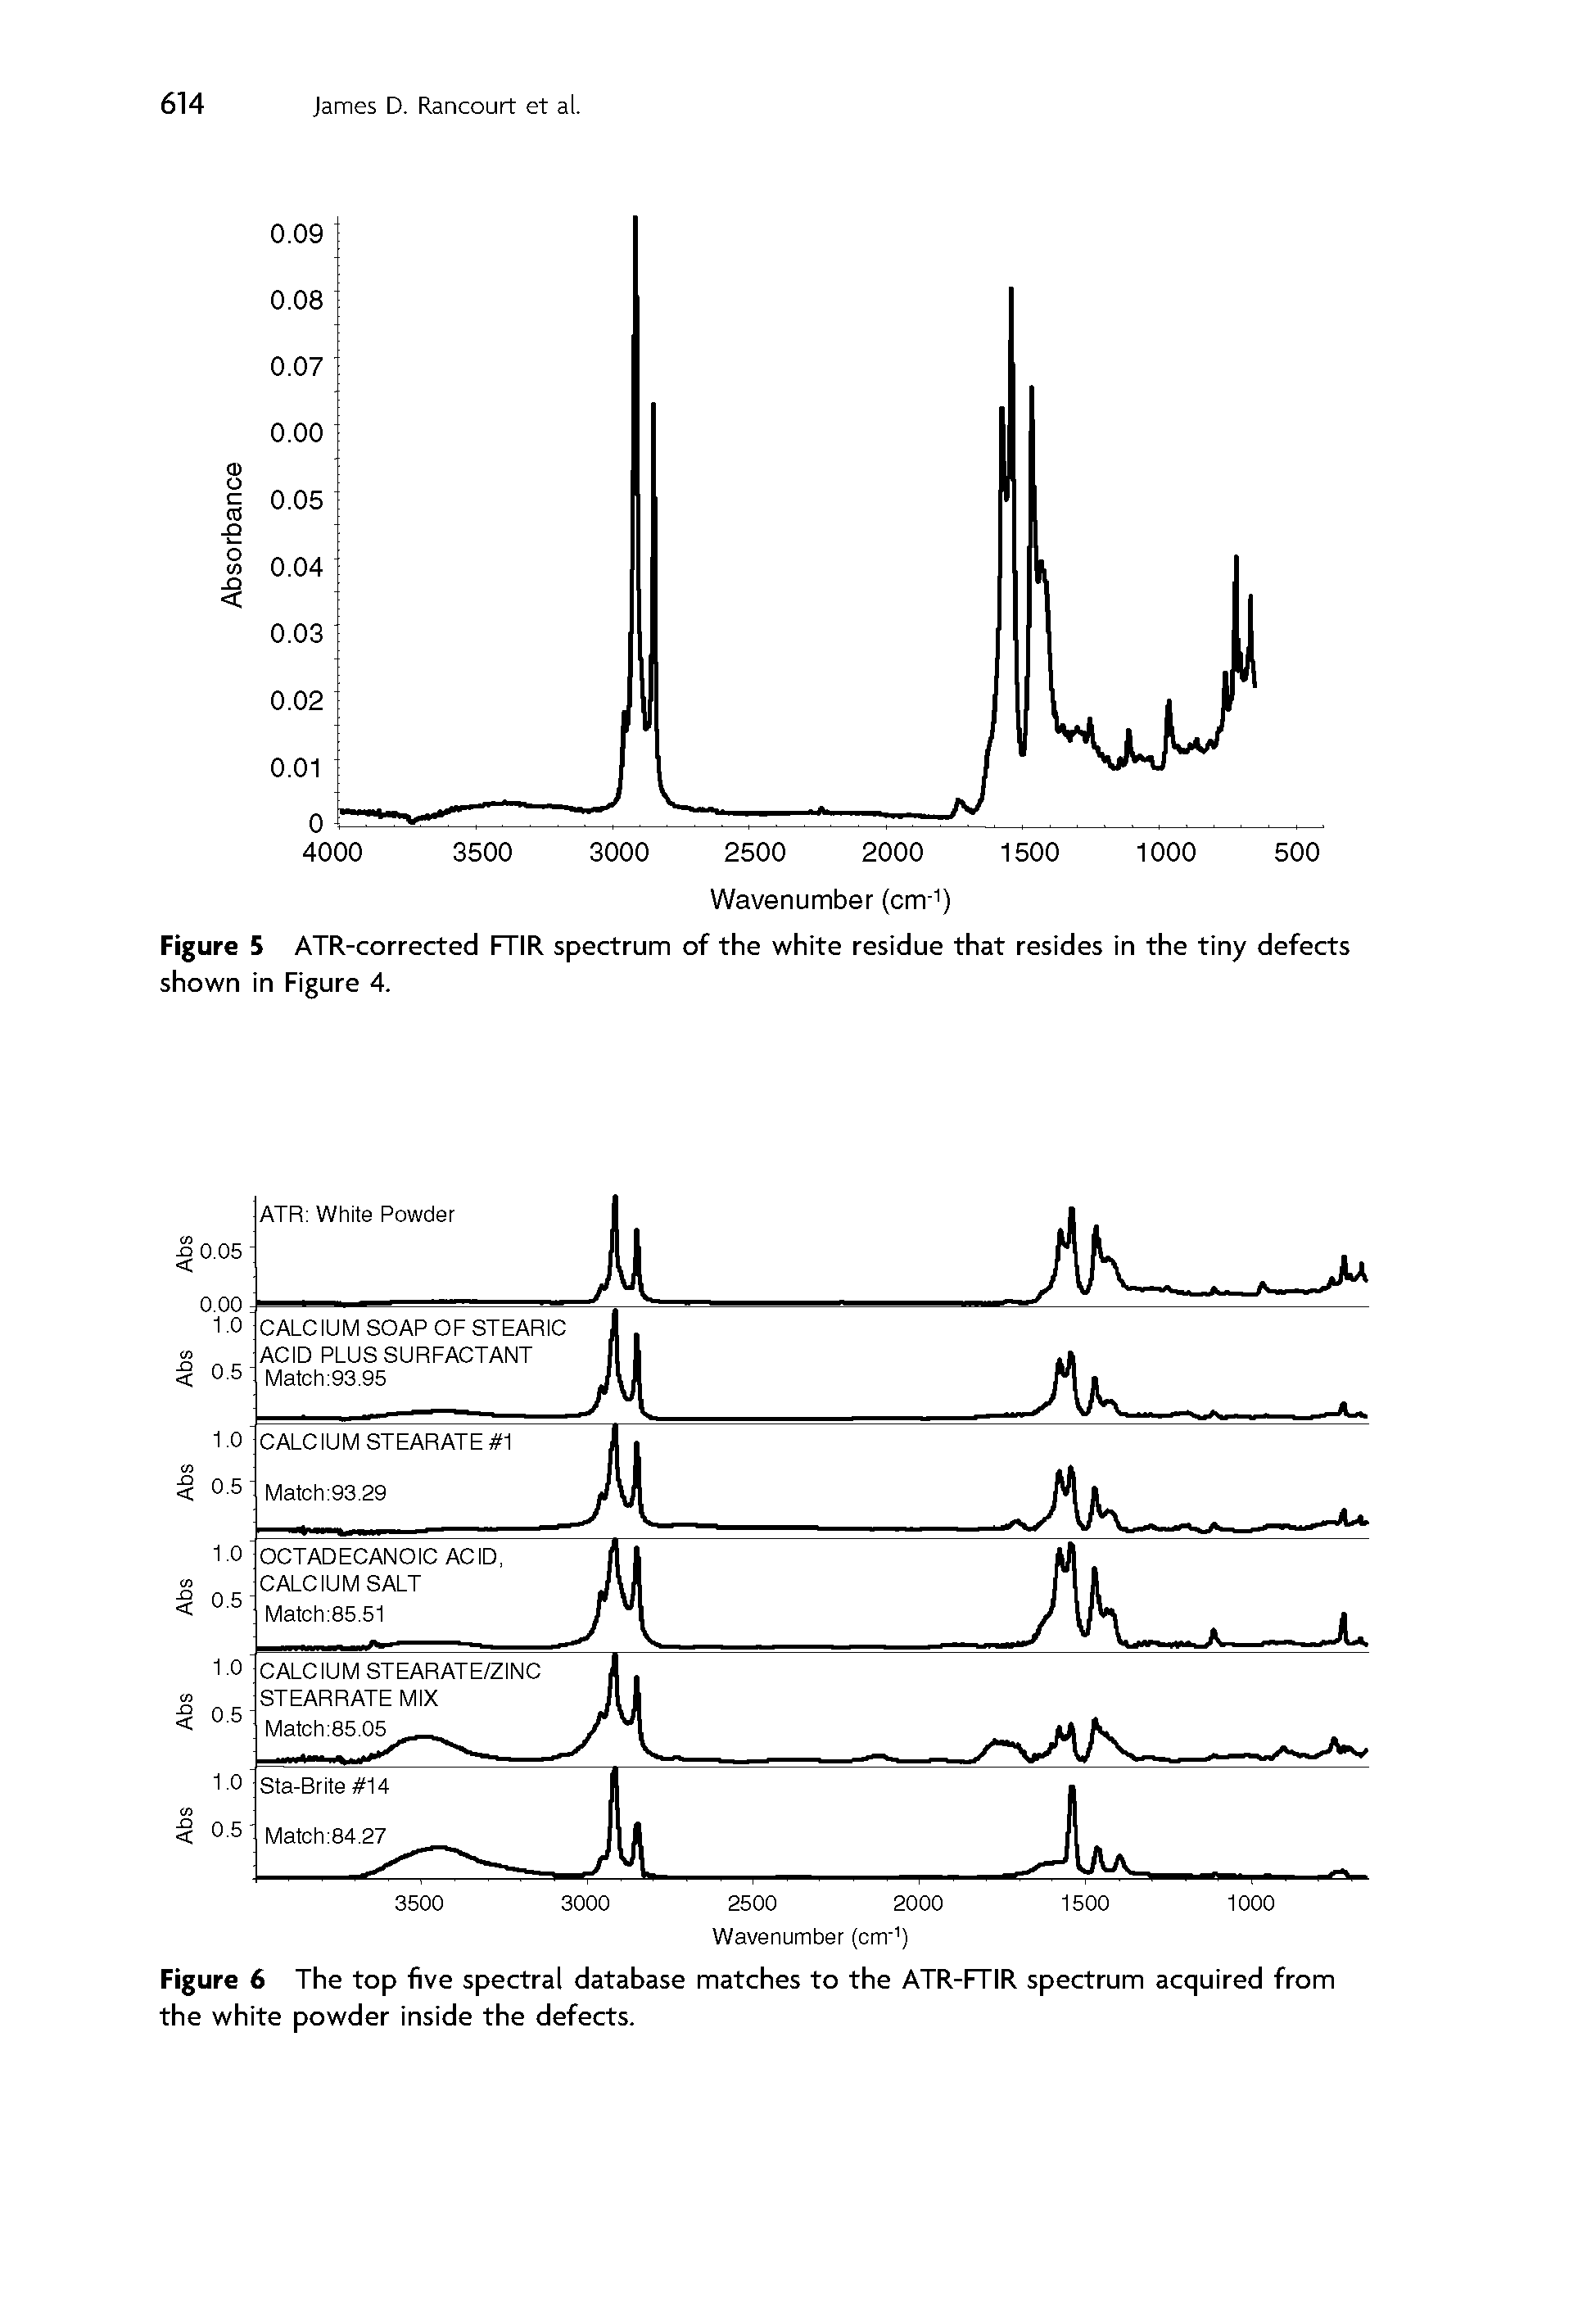 Figure 5 ATR-corrected FTIR spectrum of the white residue that resides in the tiny defects shown in Figure 4.